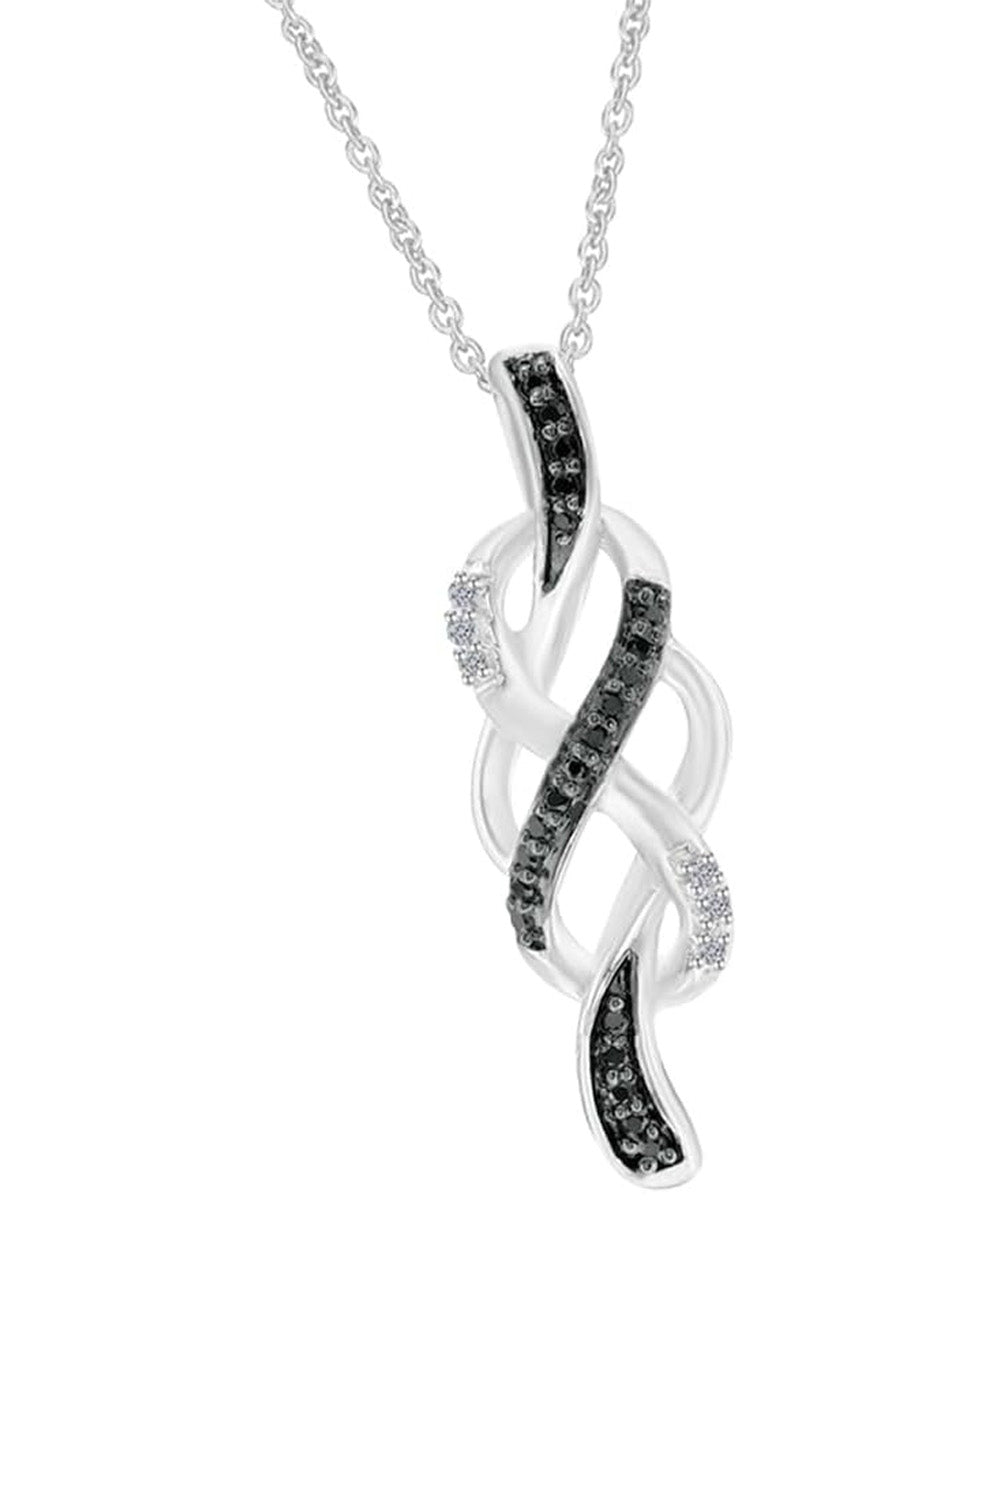 White Gold Color Black and White Infinity Knot Pendant Necklace 